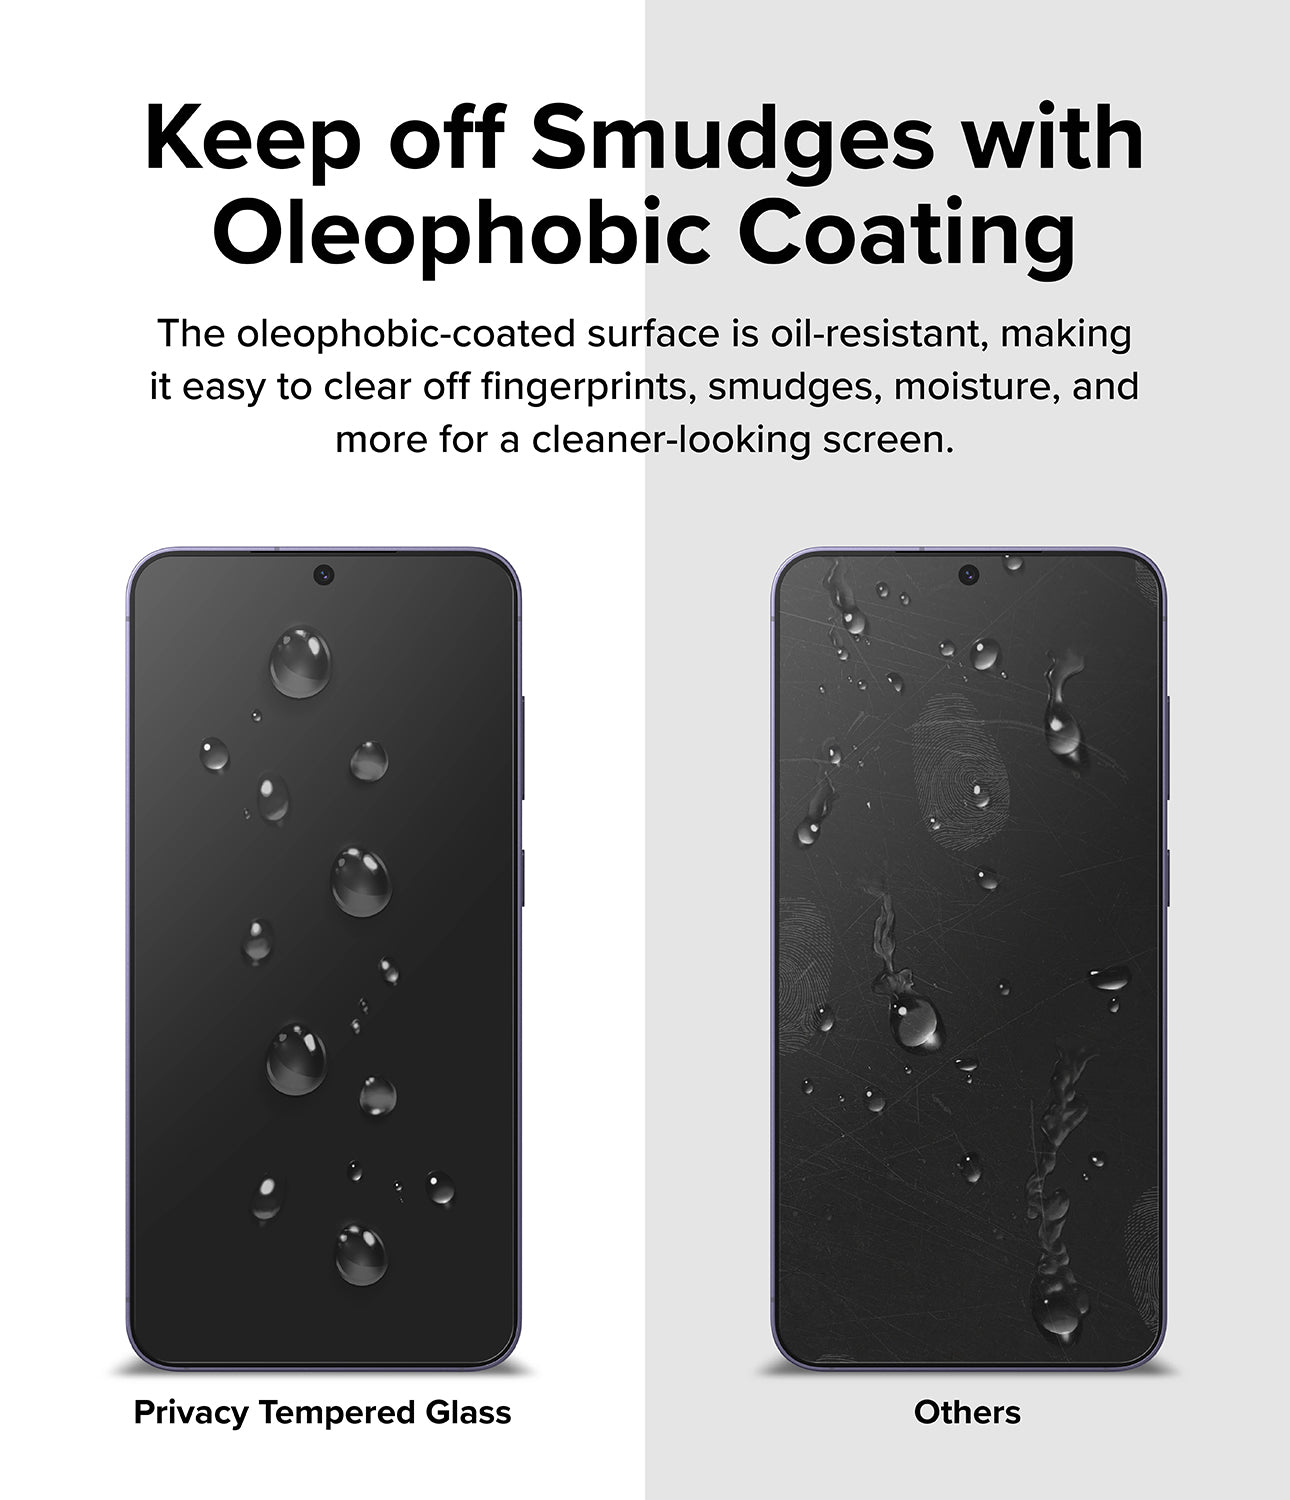 Galaxy S24 Screen Protector | Easy Slide Privacy Tempered Glass - Keep off smudges with oleophobic coating. The oleophobic-coated surface is oil-resistant, making it easy to clear off fingerprints, smudges, moisture, and more for a cleaner-looking screen.